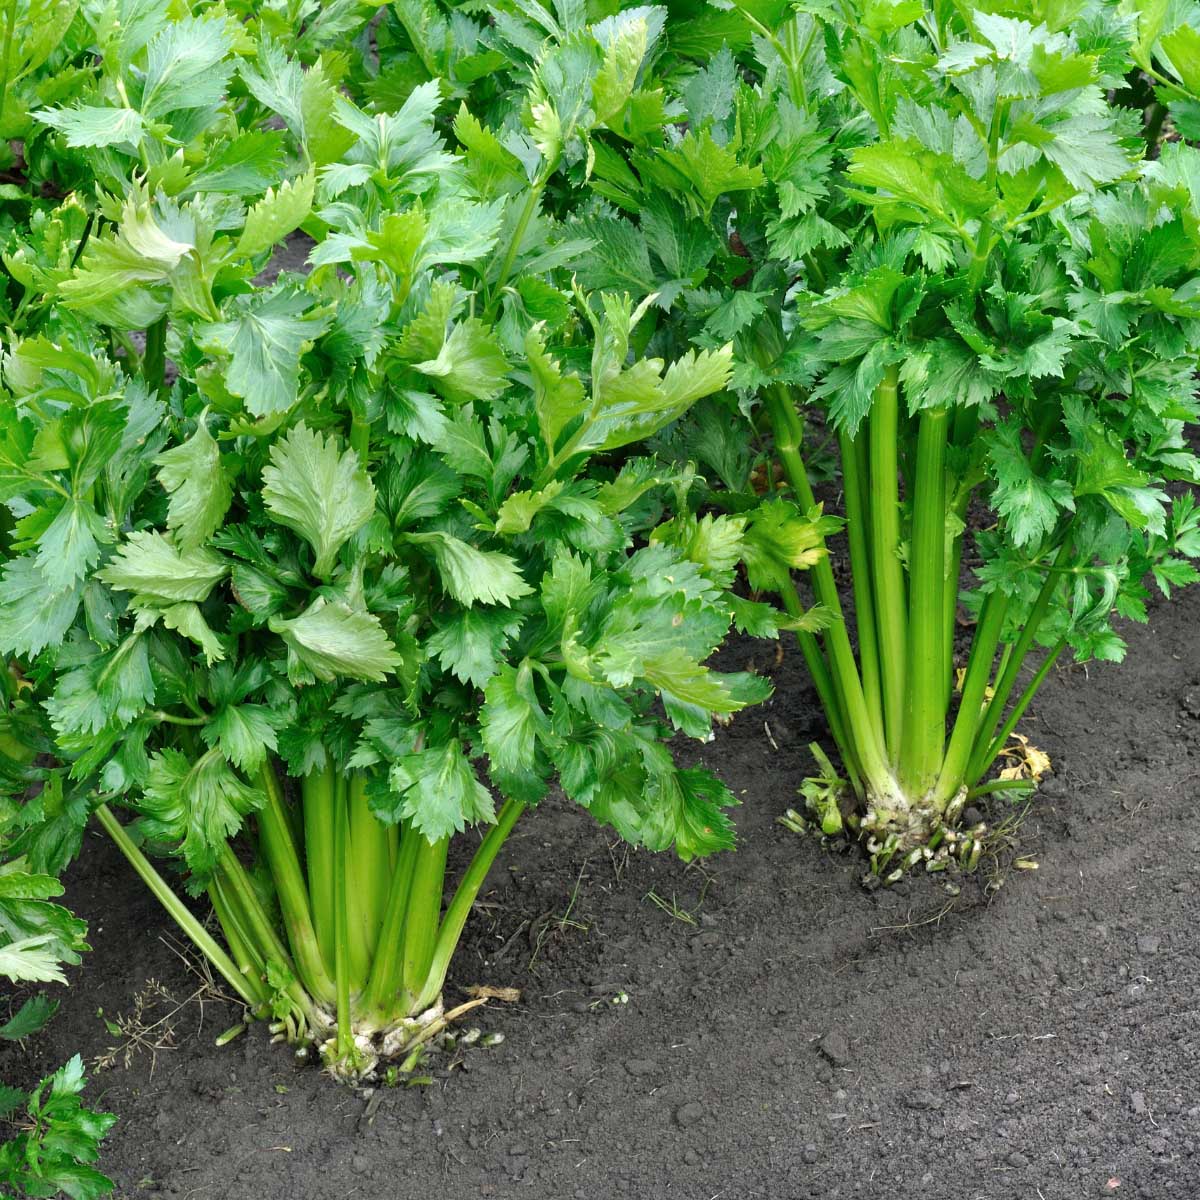 How Long Does It Take For Celery To Germinate